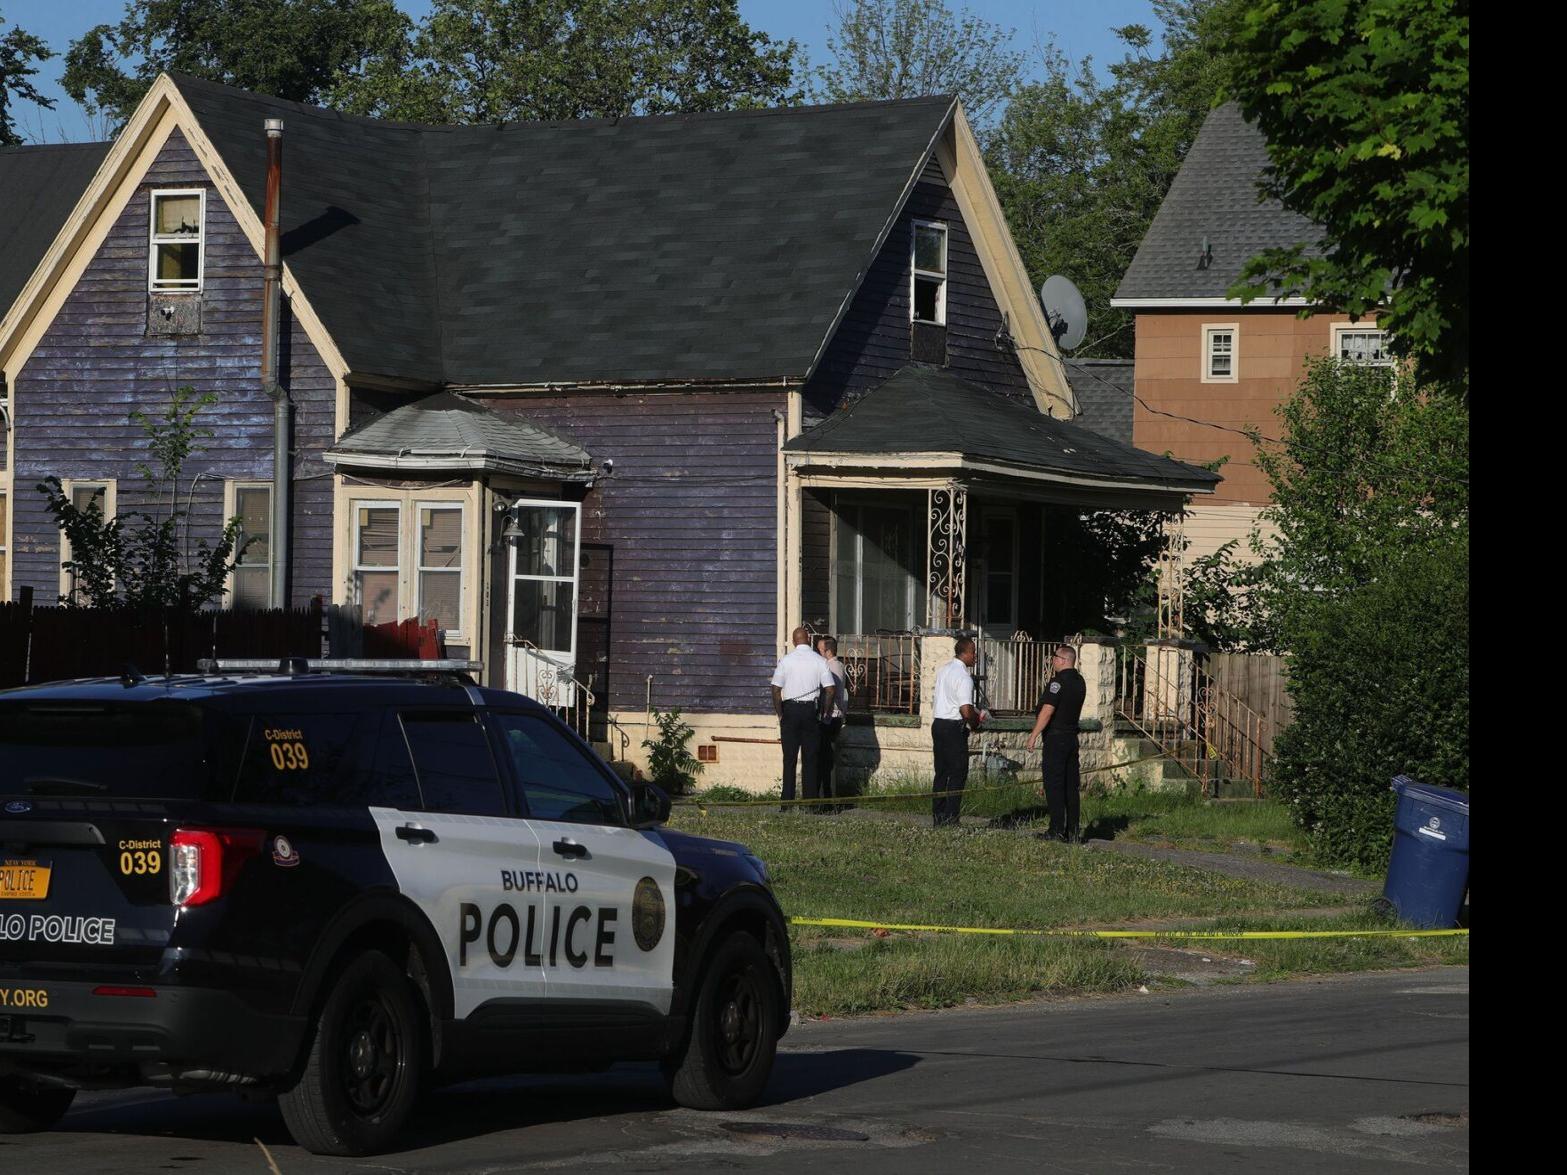 Three found killed in house, four wounded park within 10 hours in Buffalo | Crime News | buffalonews.com